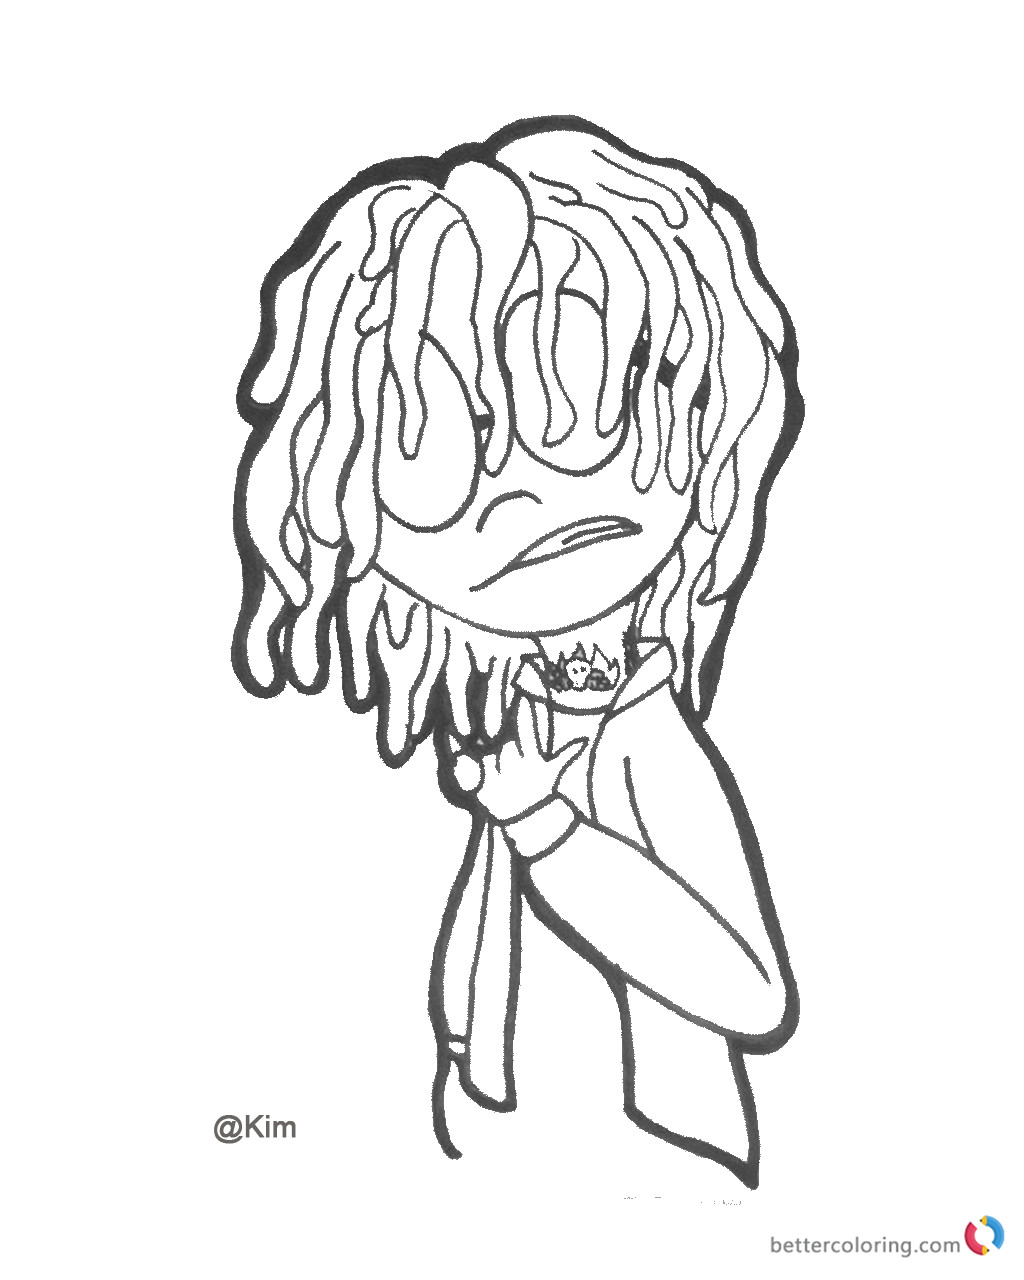 Lil Pump Coloring Pages
 Lil Pump Cartoon Coloring Pages Free Printable Coloring